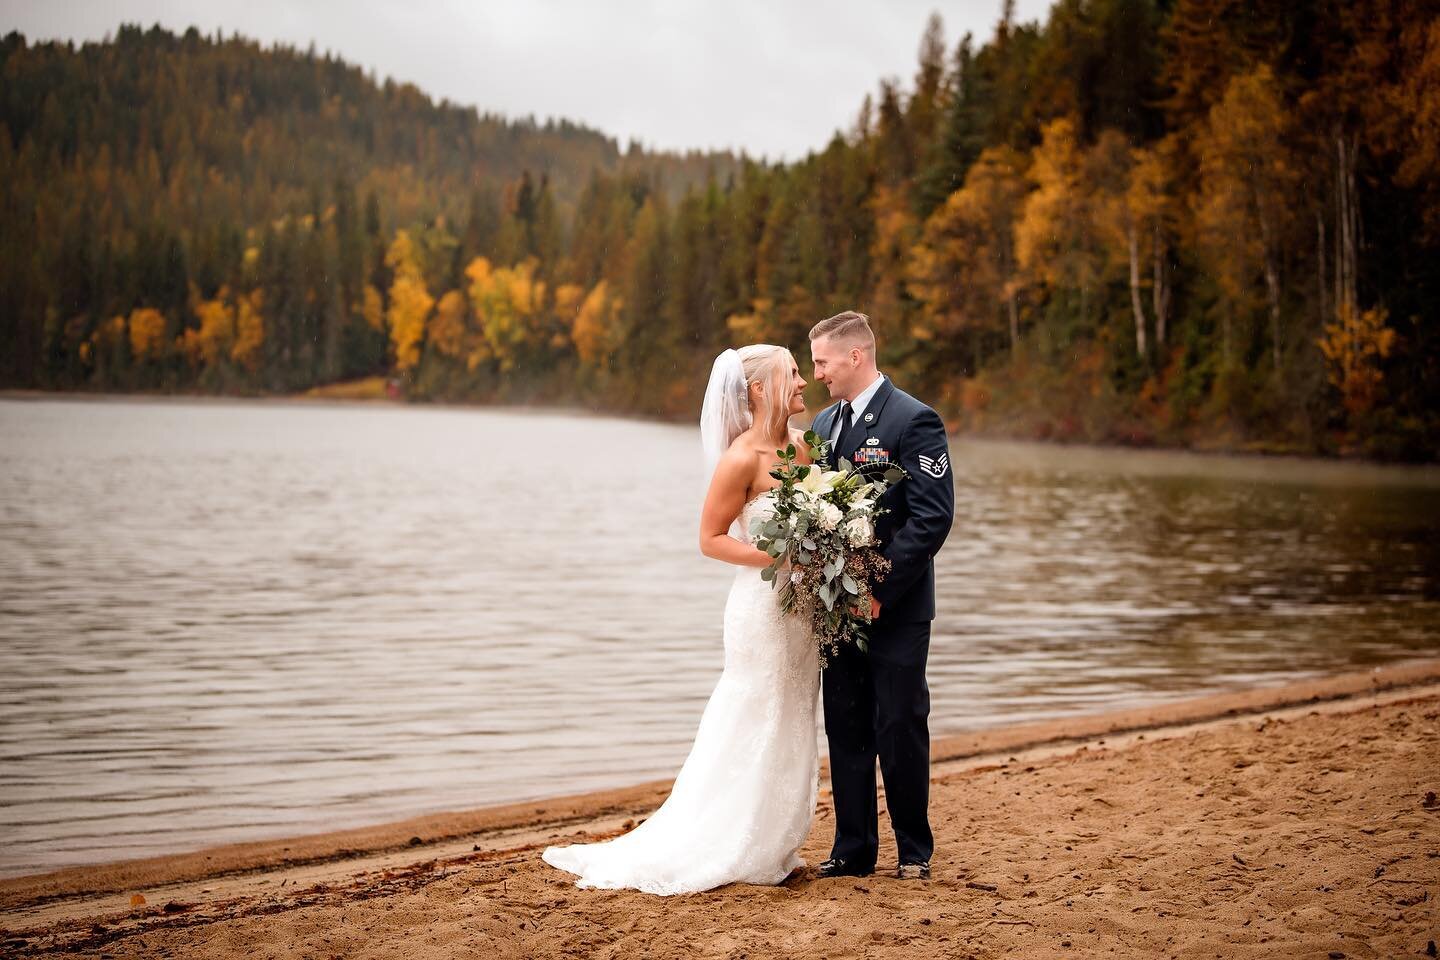 Saturday, Byron and Amy had a gorgeous fall wedding along the banks of Priest Lake at the Elkins Resort on Priest Lake. These two were full of joy and their bridal party were rock stars all day long! Nothing could stop everyone from having a blast an